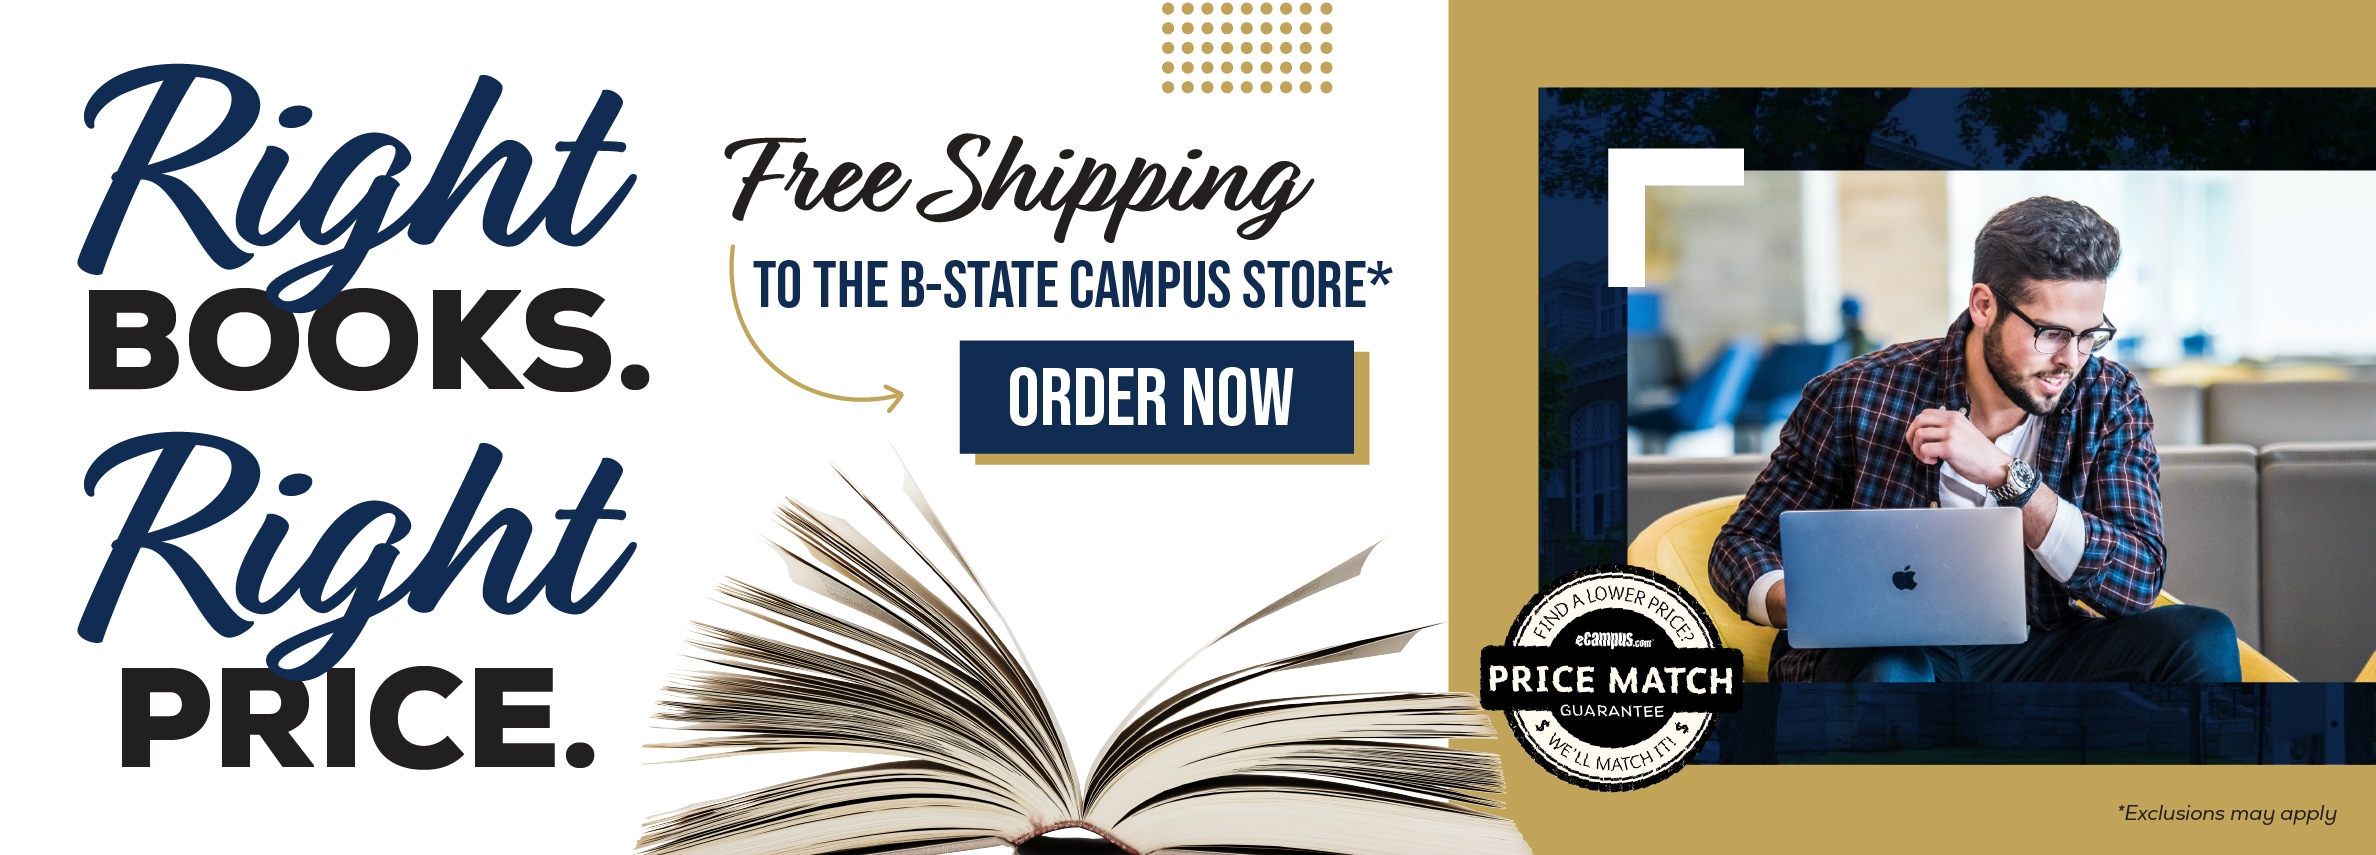 Right books. Right price. Free shipping oo the B-State Campus Store.* Order now. Price Match Guarantee. *Exclusions may apply.